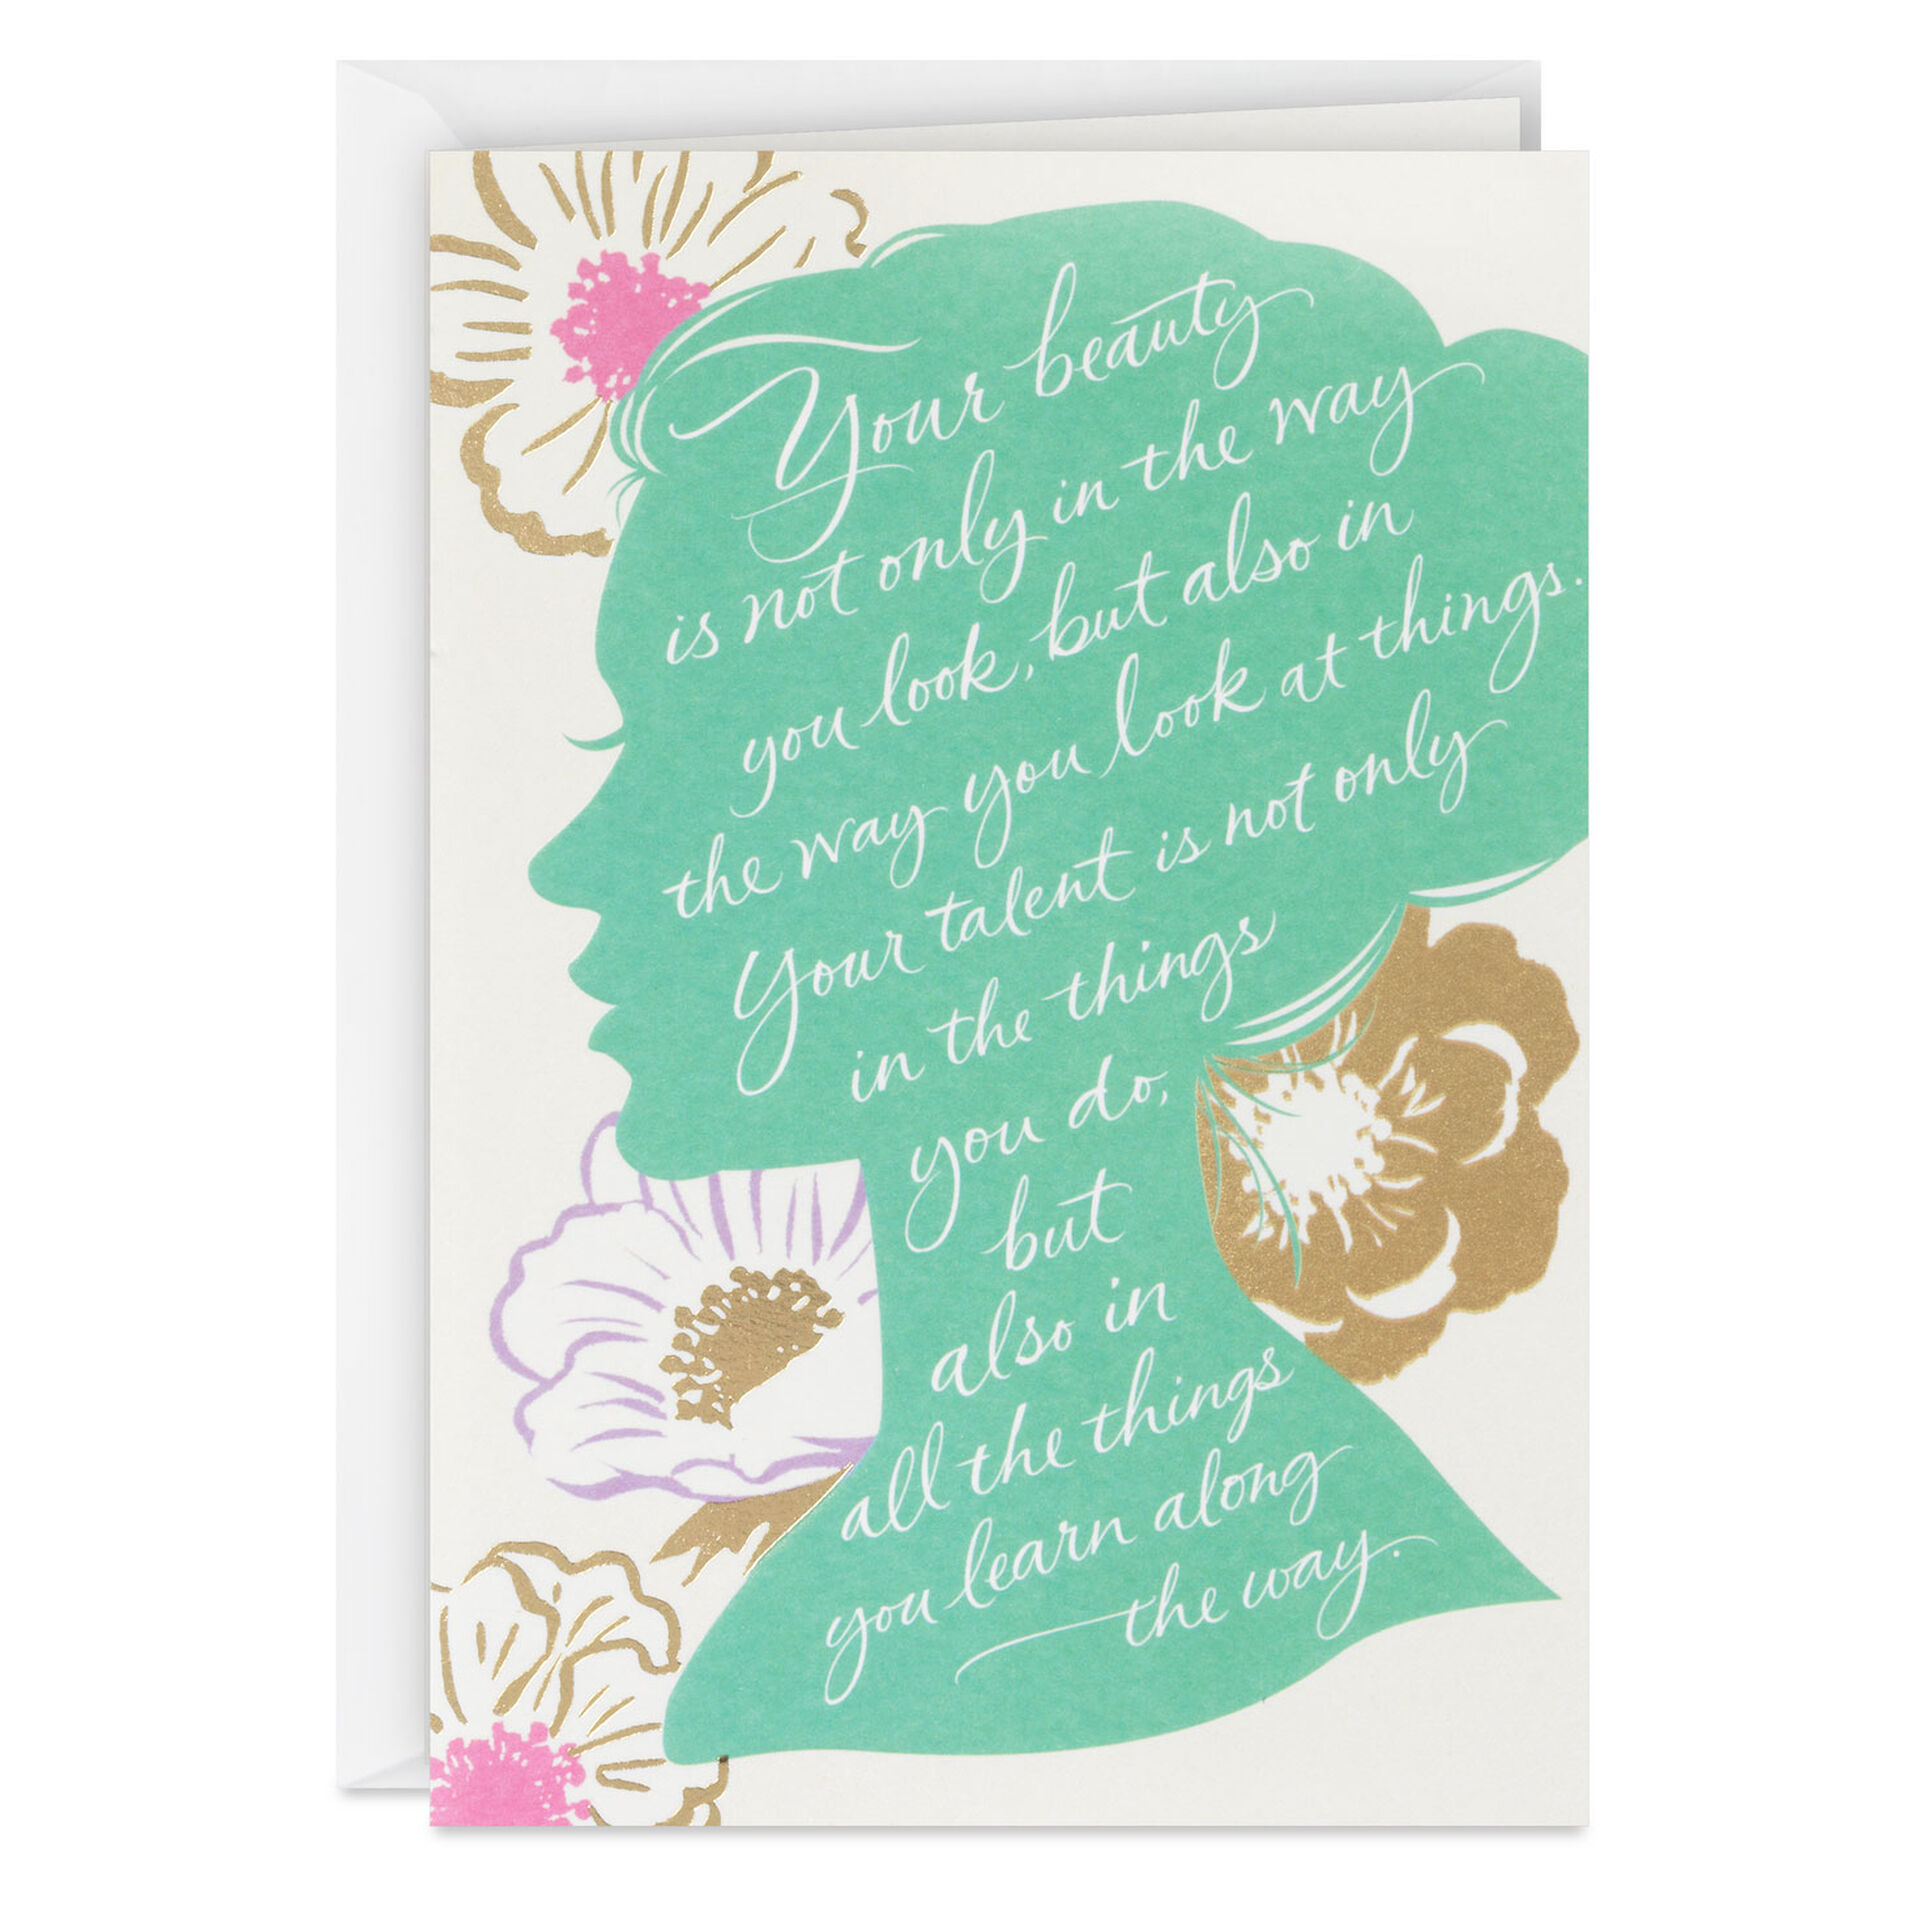 Woman-Silhouette-and-Flowers-Birthday-Card-for-Her_399HBD3806_01